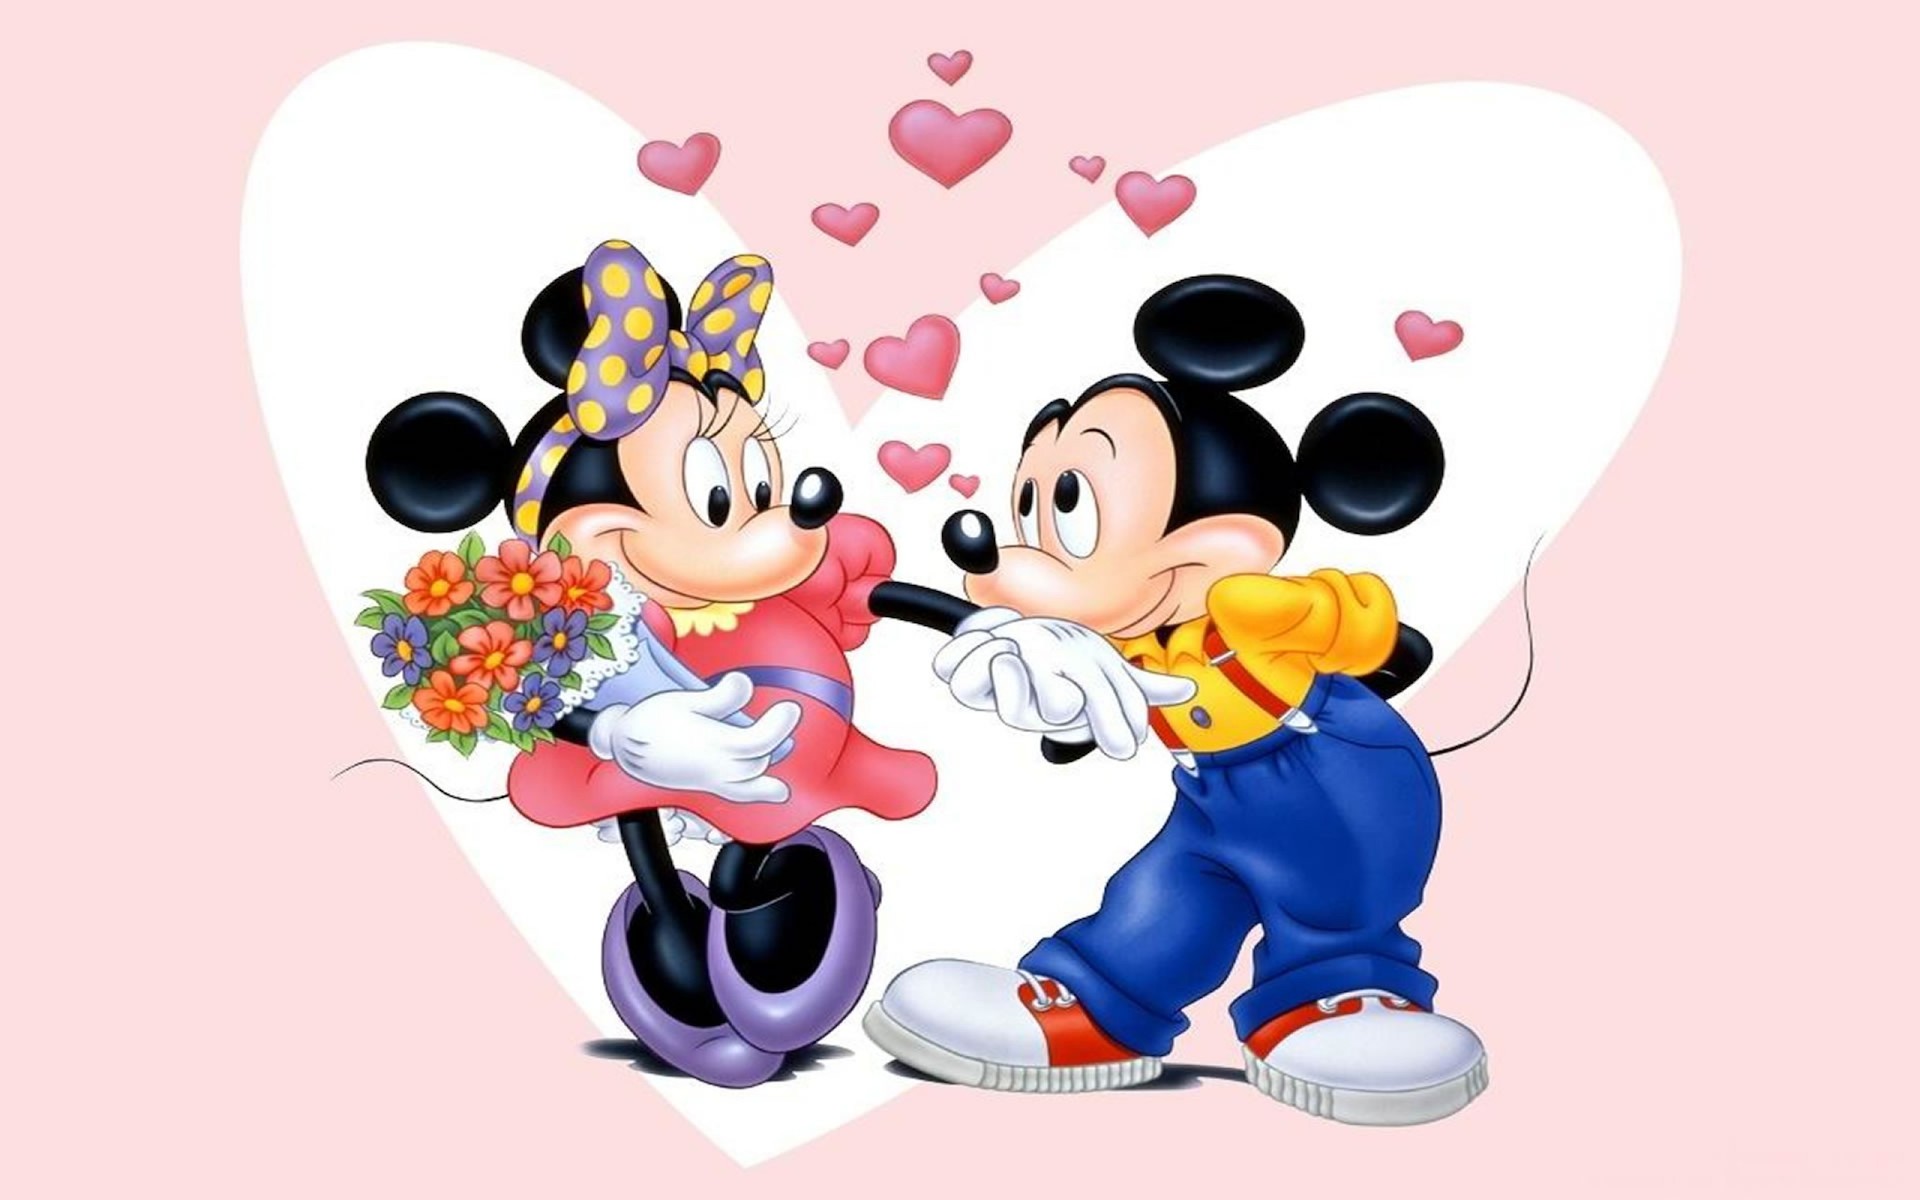 Disney Mickey Mouse And Minnie Mouse Love Hd W - Mickey Mouse And Minnie Mouse Love - HD Wallpaper 